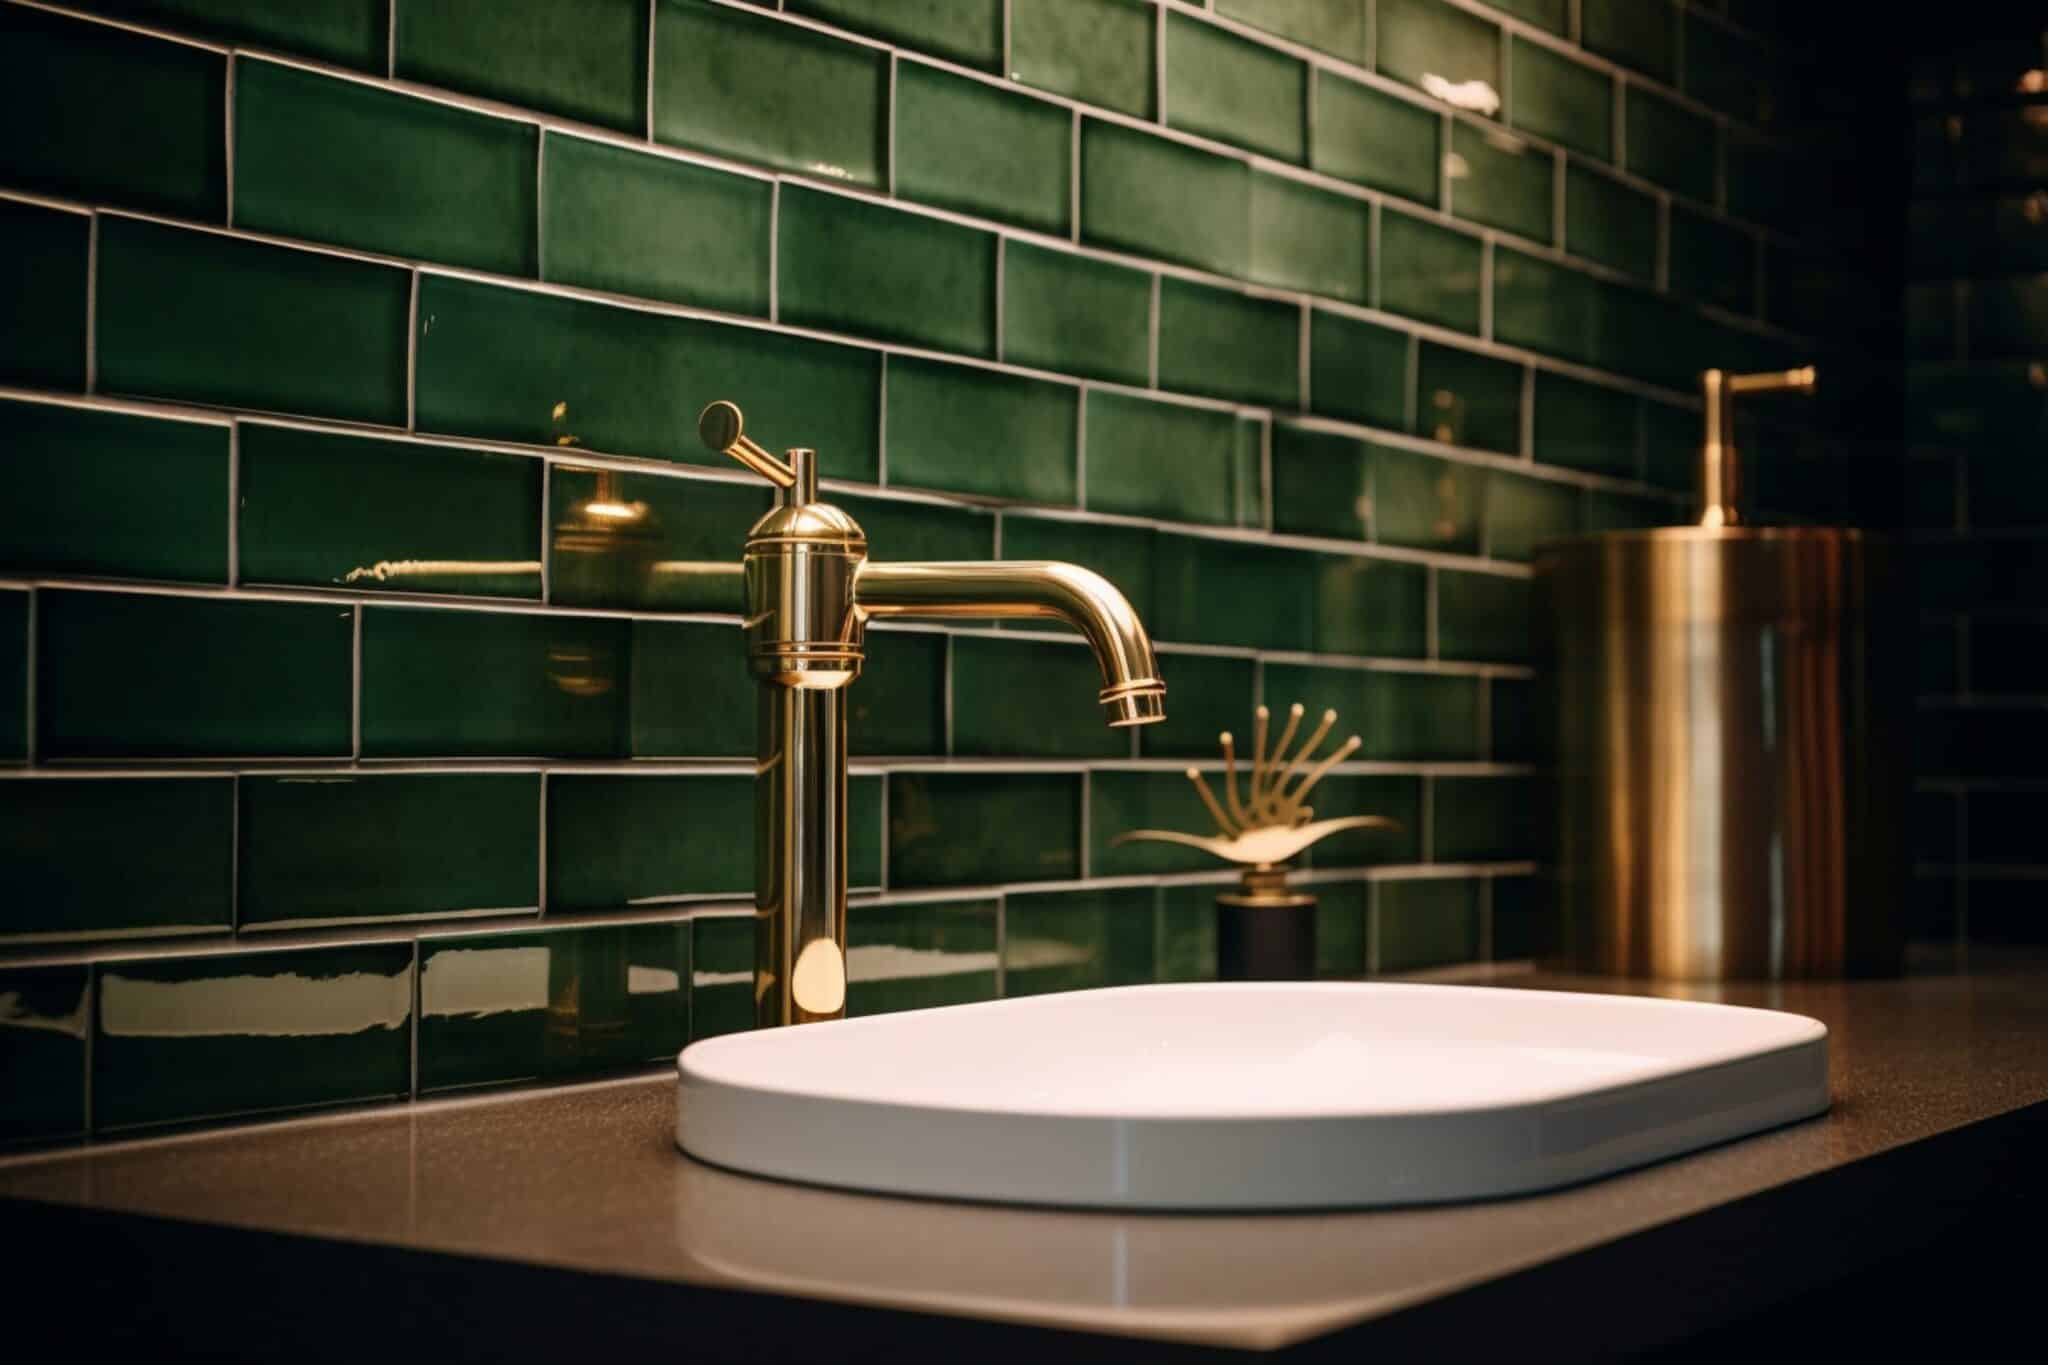 Bathroom with green subway tile walls, gold lights, marble sink, and gold faucet.